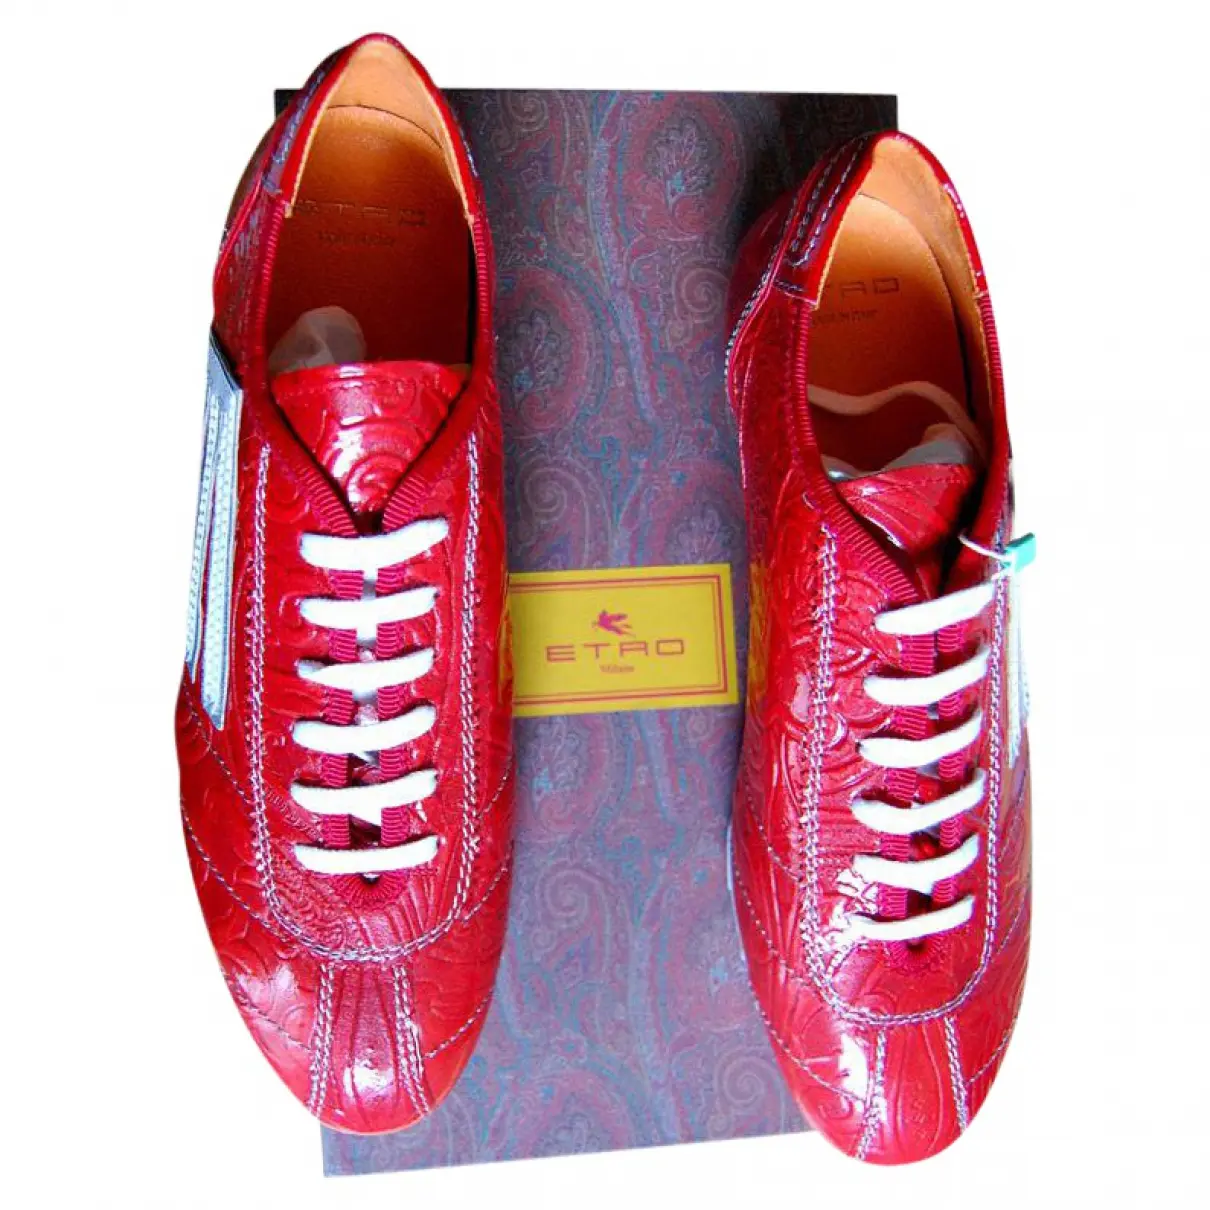 Buy Etro Patent leather trainers online